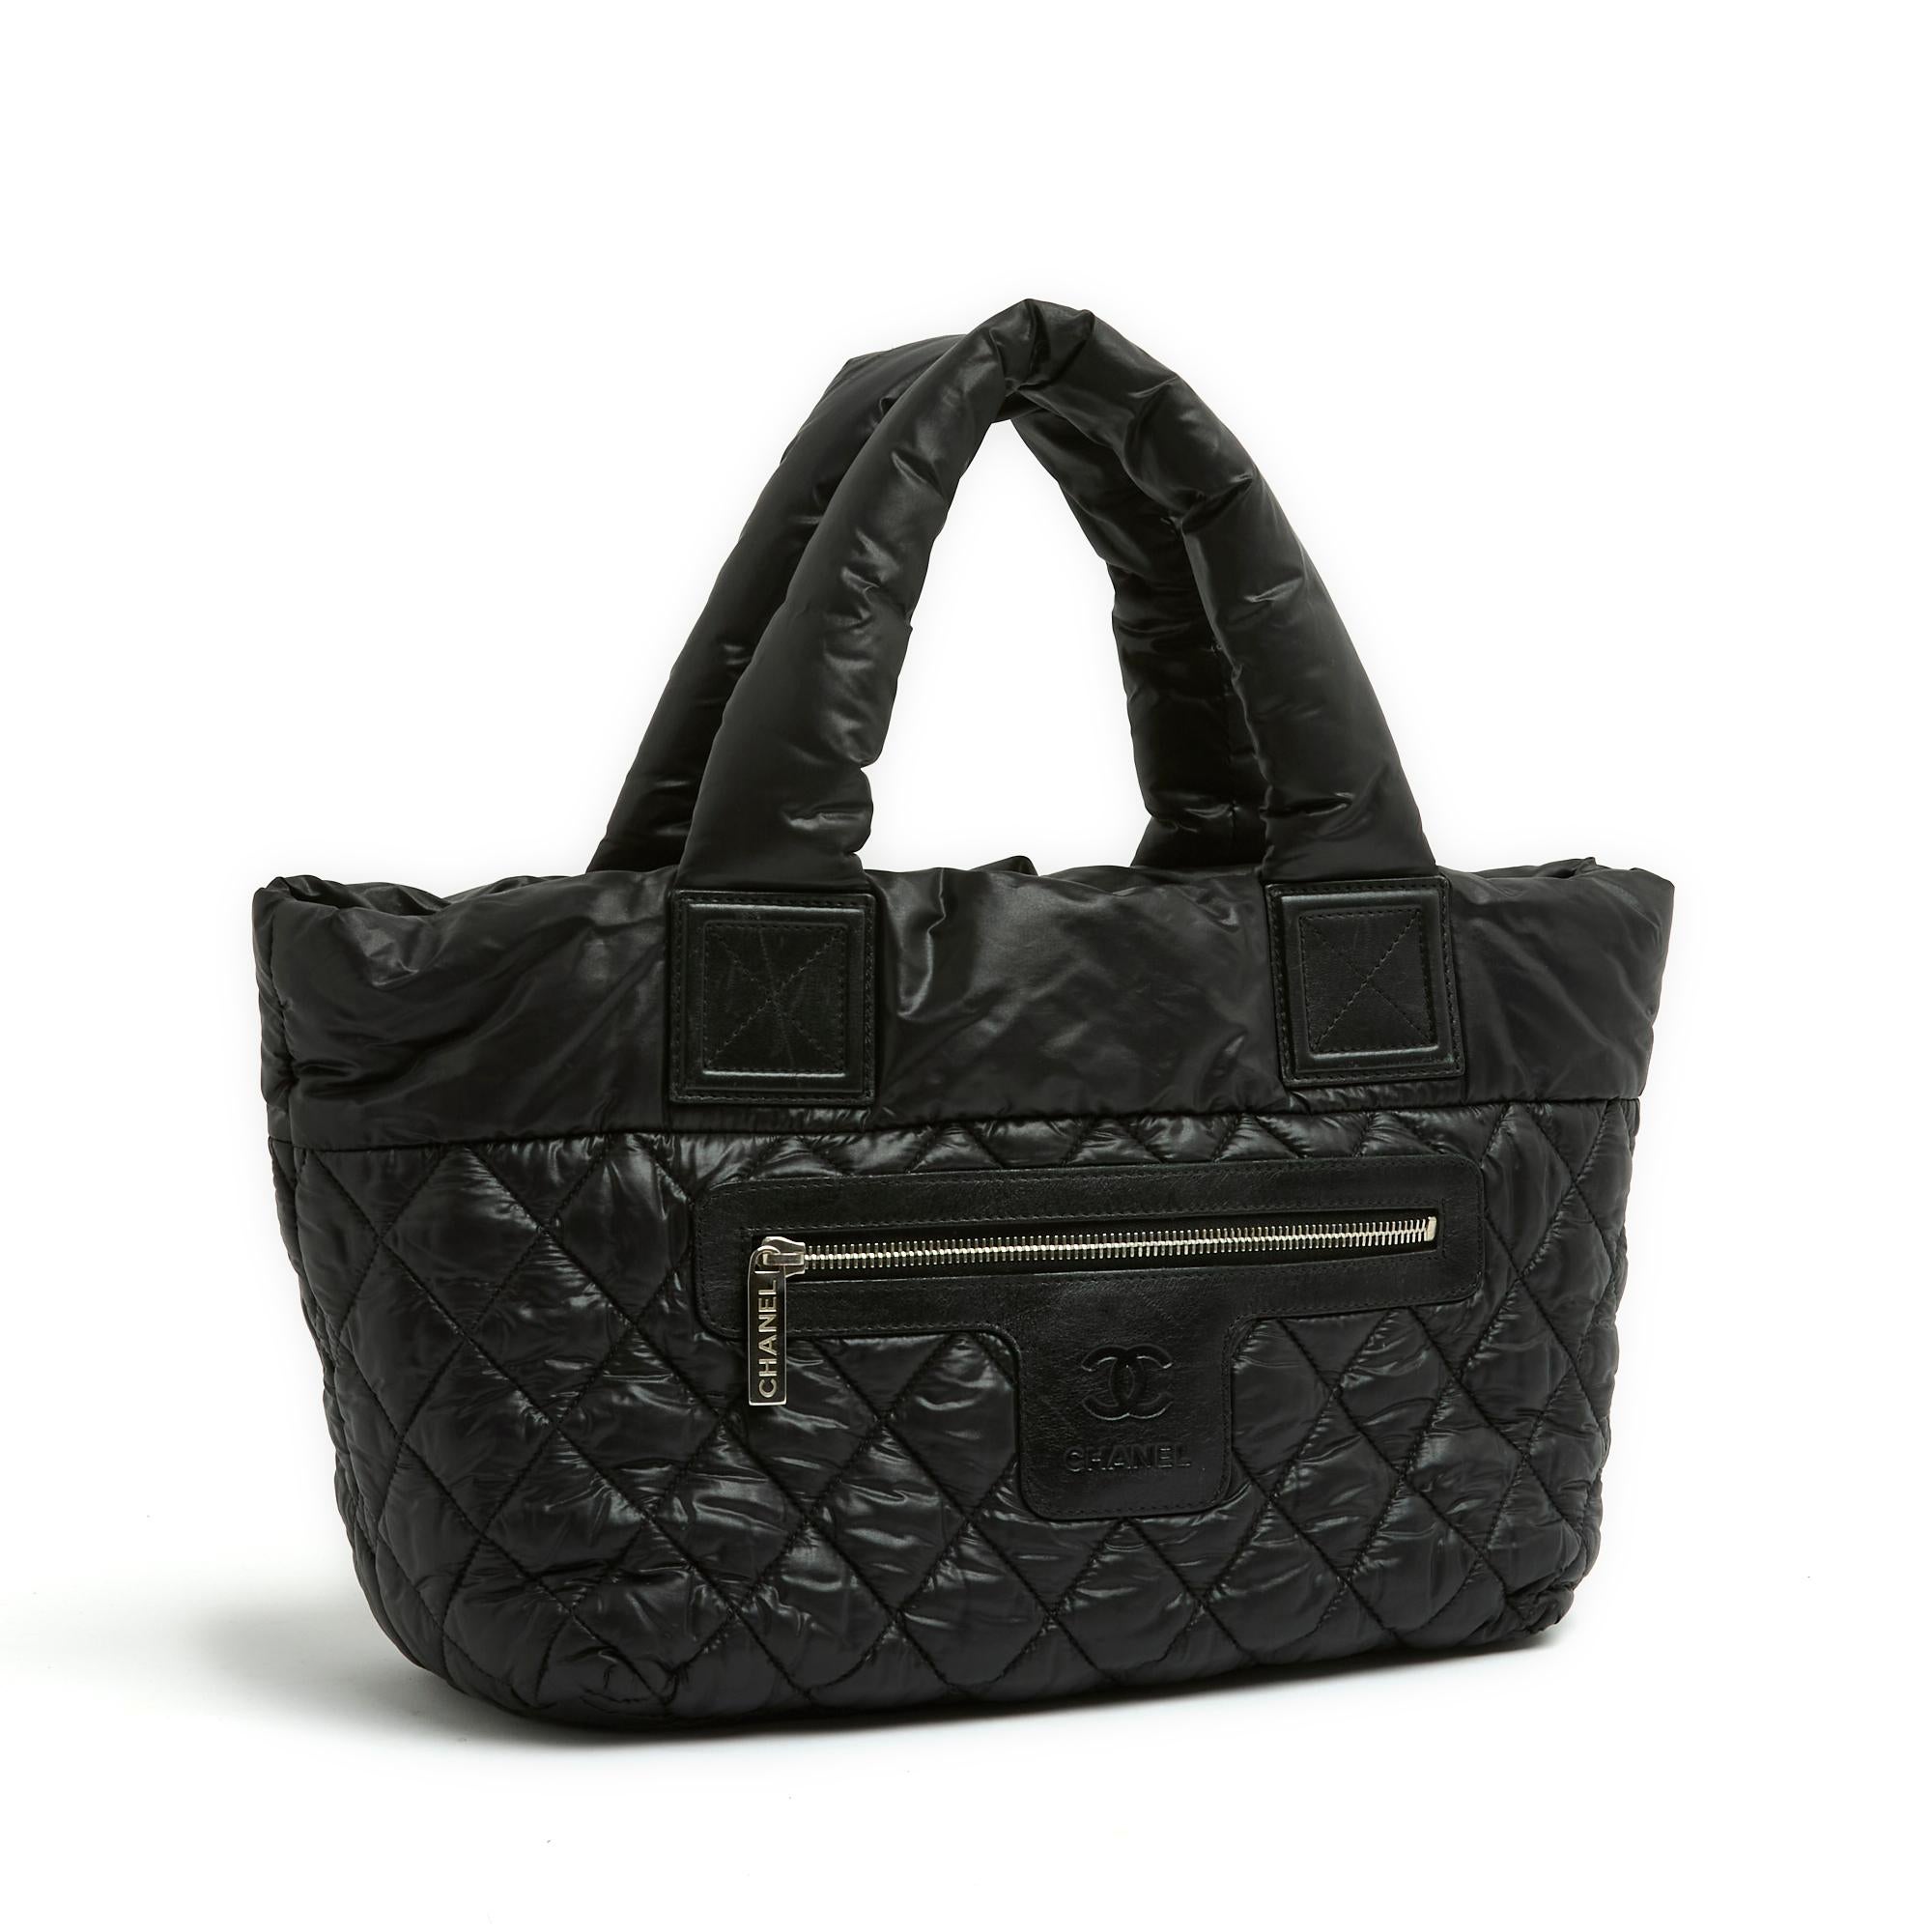 Chanel Sac Cocoon Nylon Black PM Bag In Excellent Condition For Sale In PARIS, FR